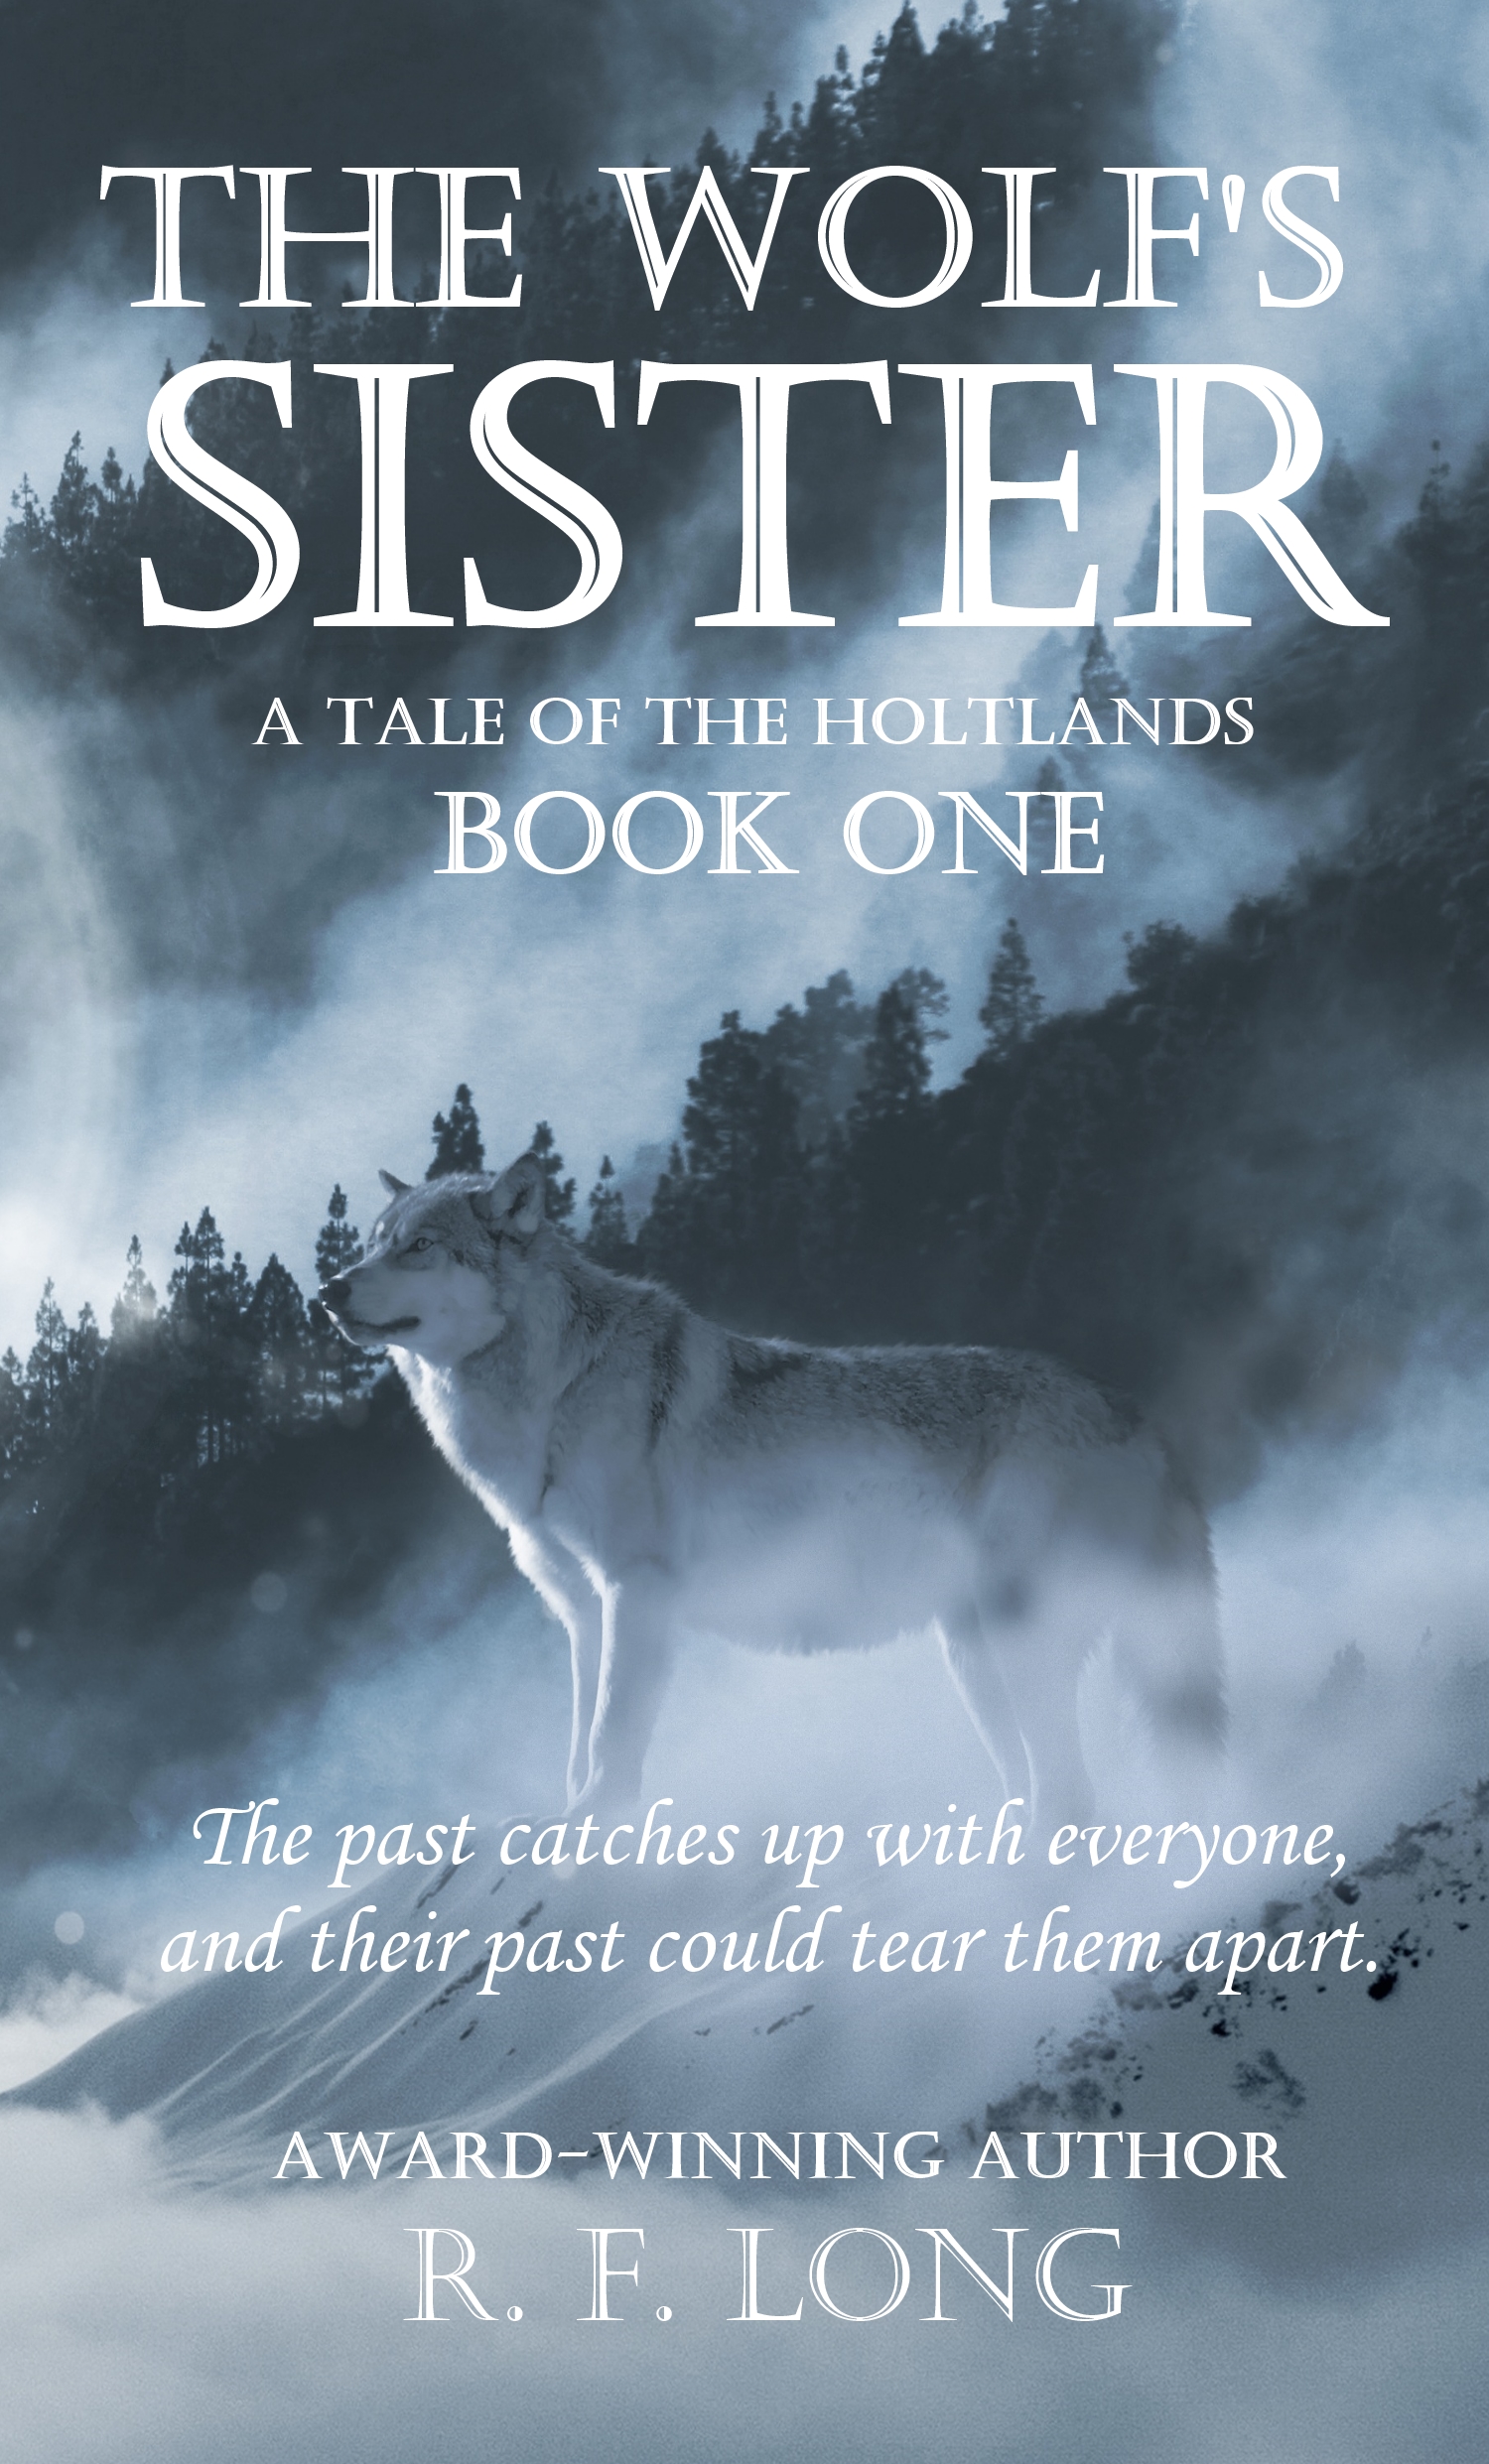 The Wolf's Sister